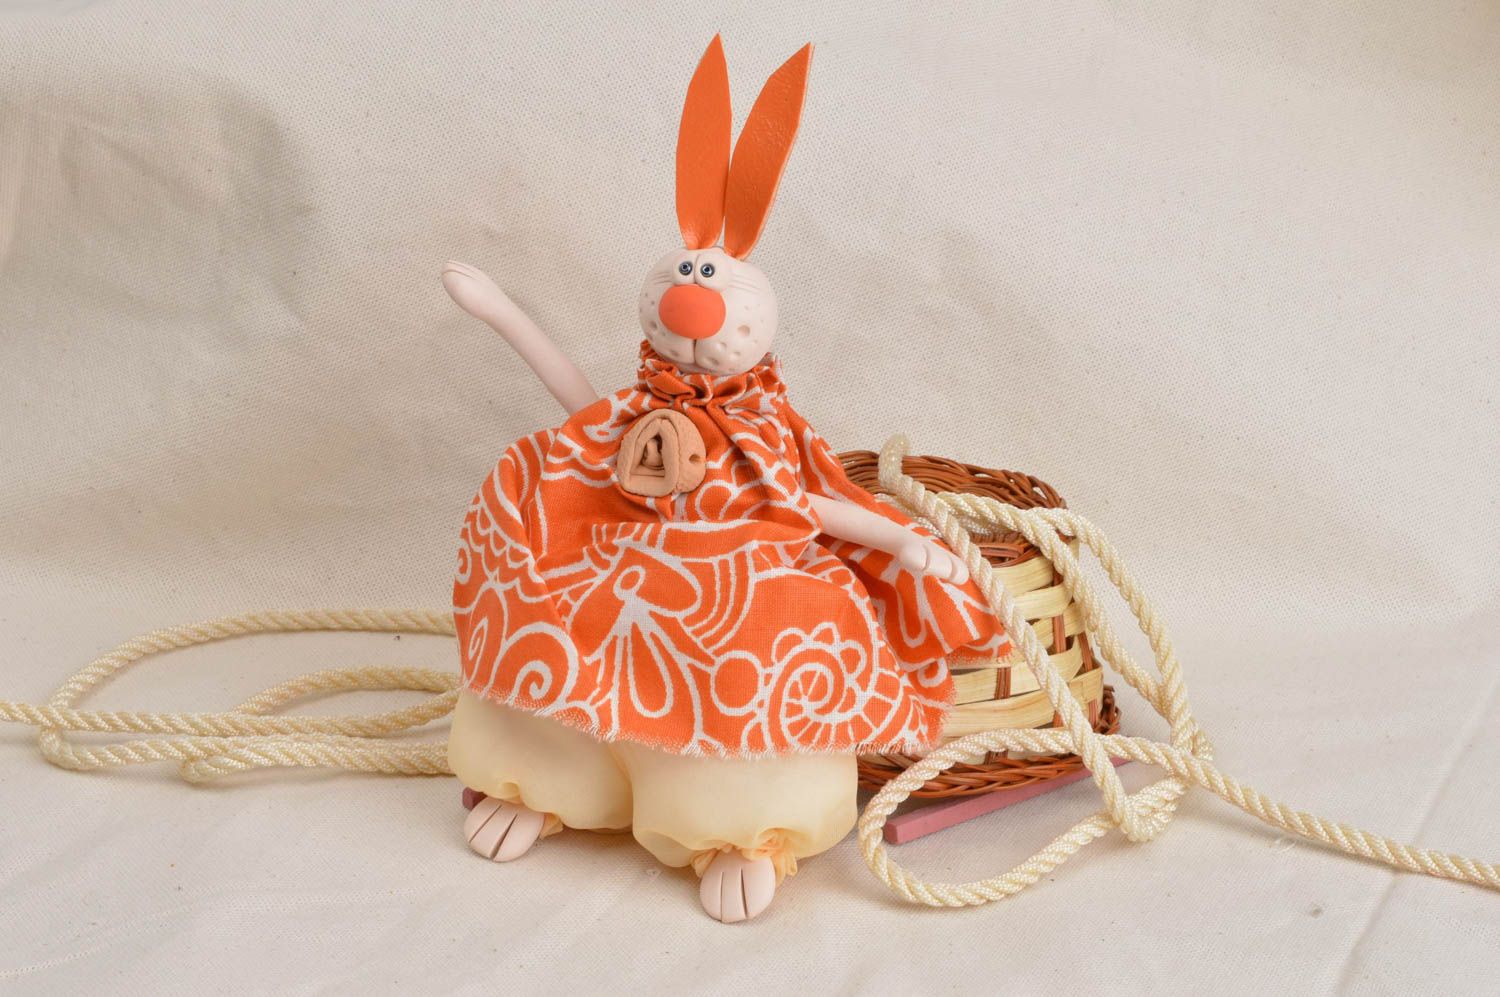 Handmade cute orange toy rabbit made of clay faience and cotton for decor photo 1